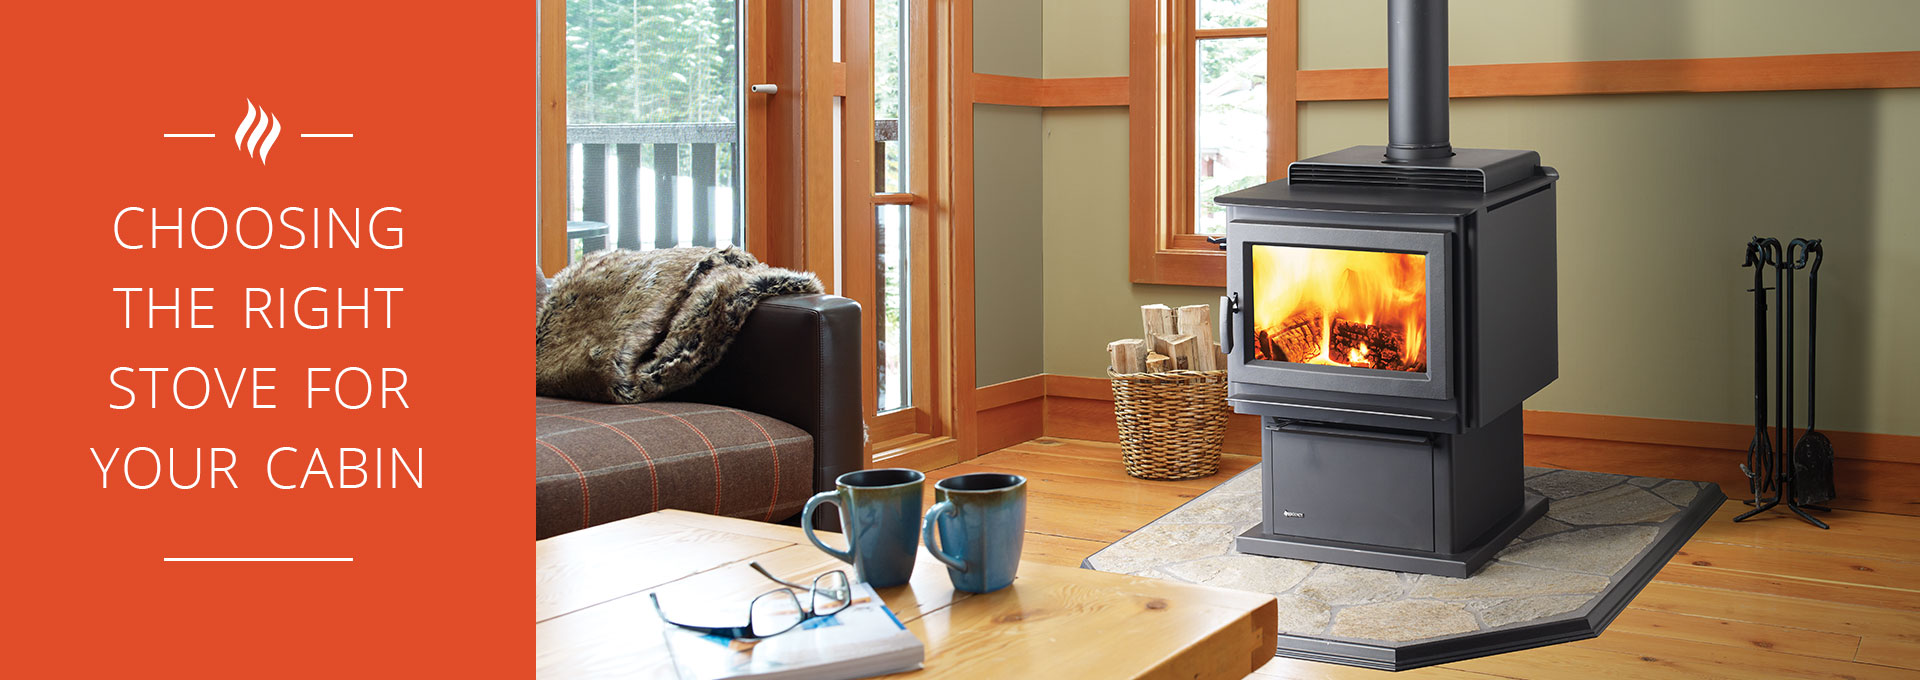 Choosing the Right Stove for Your Cabin 